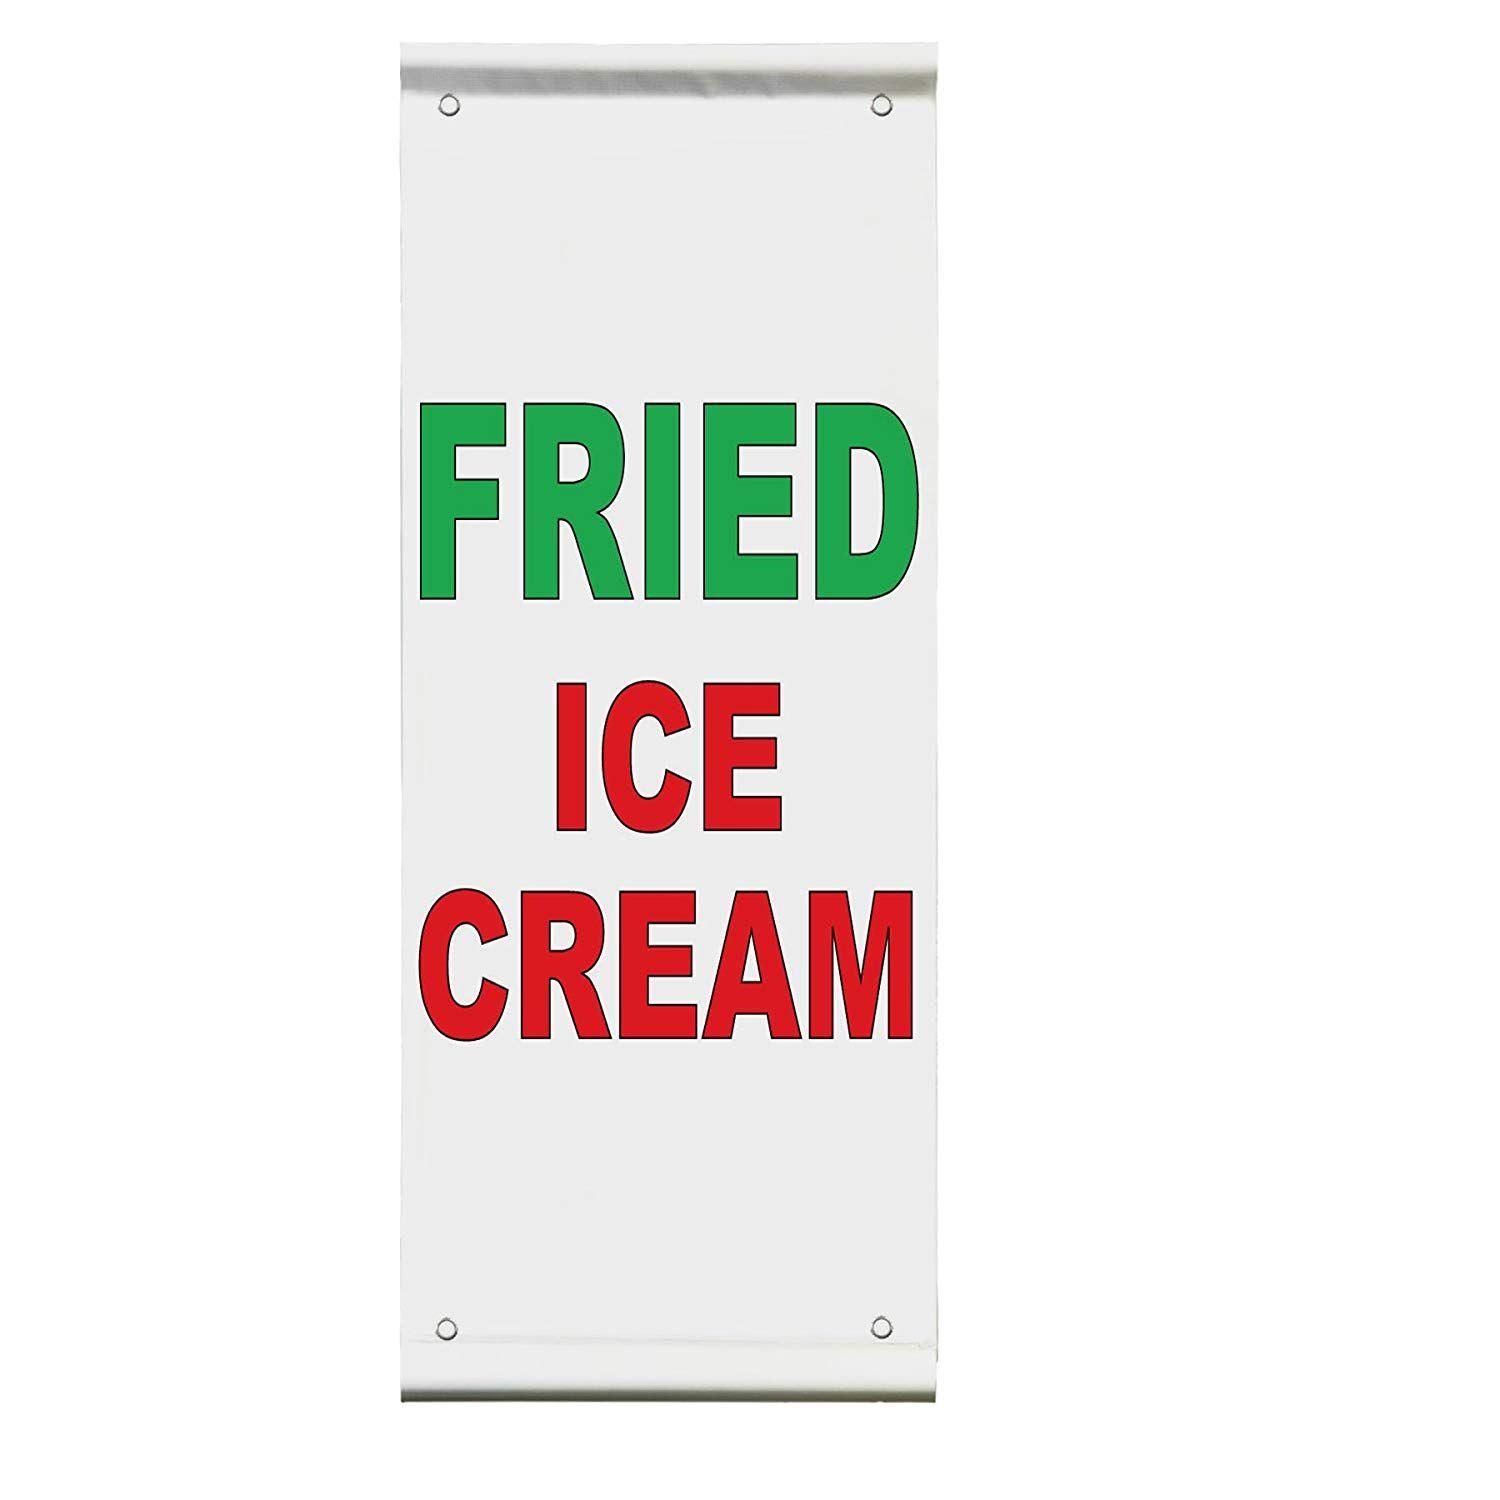 Red and Green Banner Restaurant Logo - Amazon.com : Fried Ice-Cream Green Red Bar Restaurant Double Sided ...